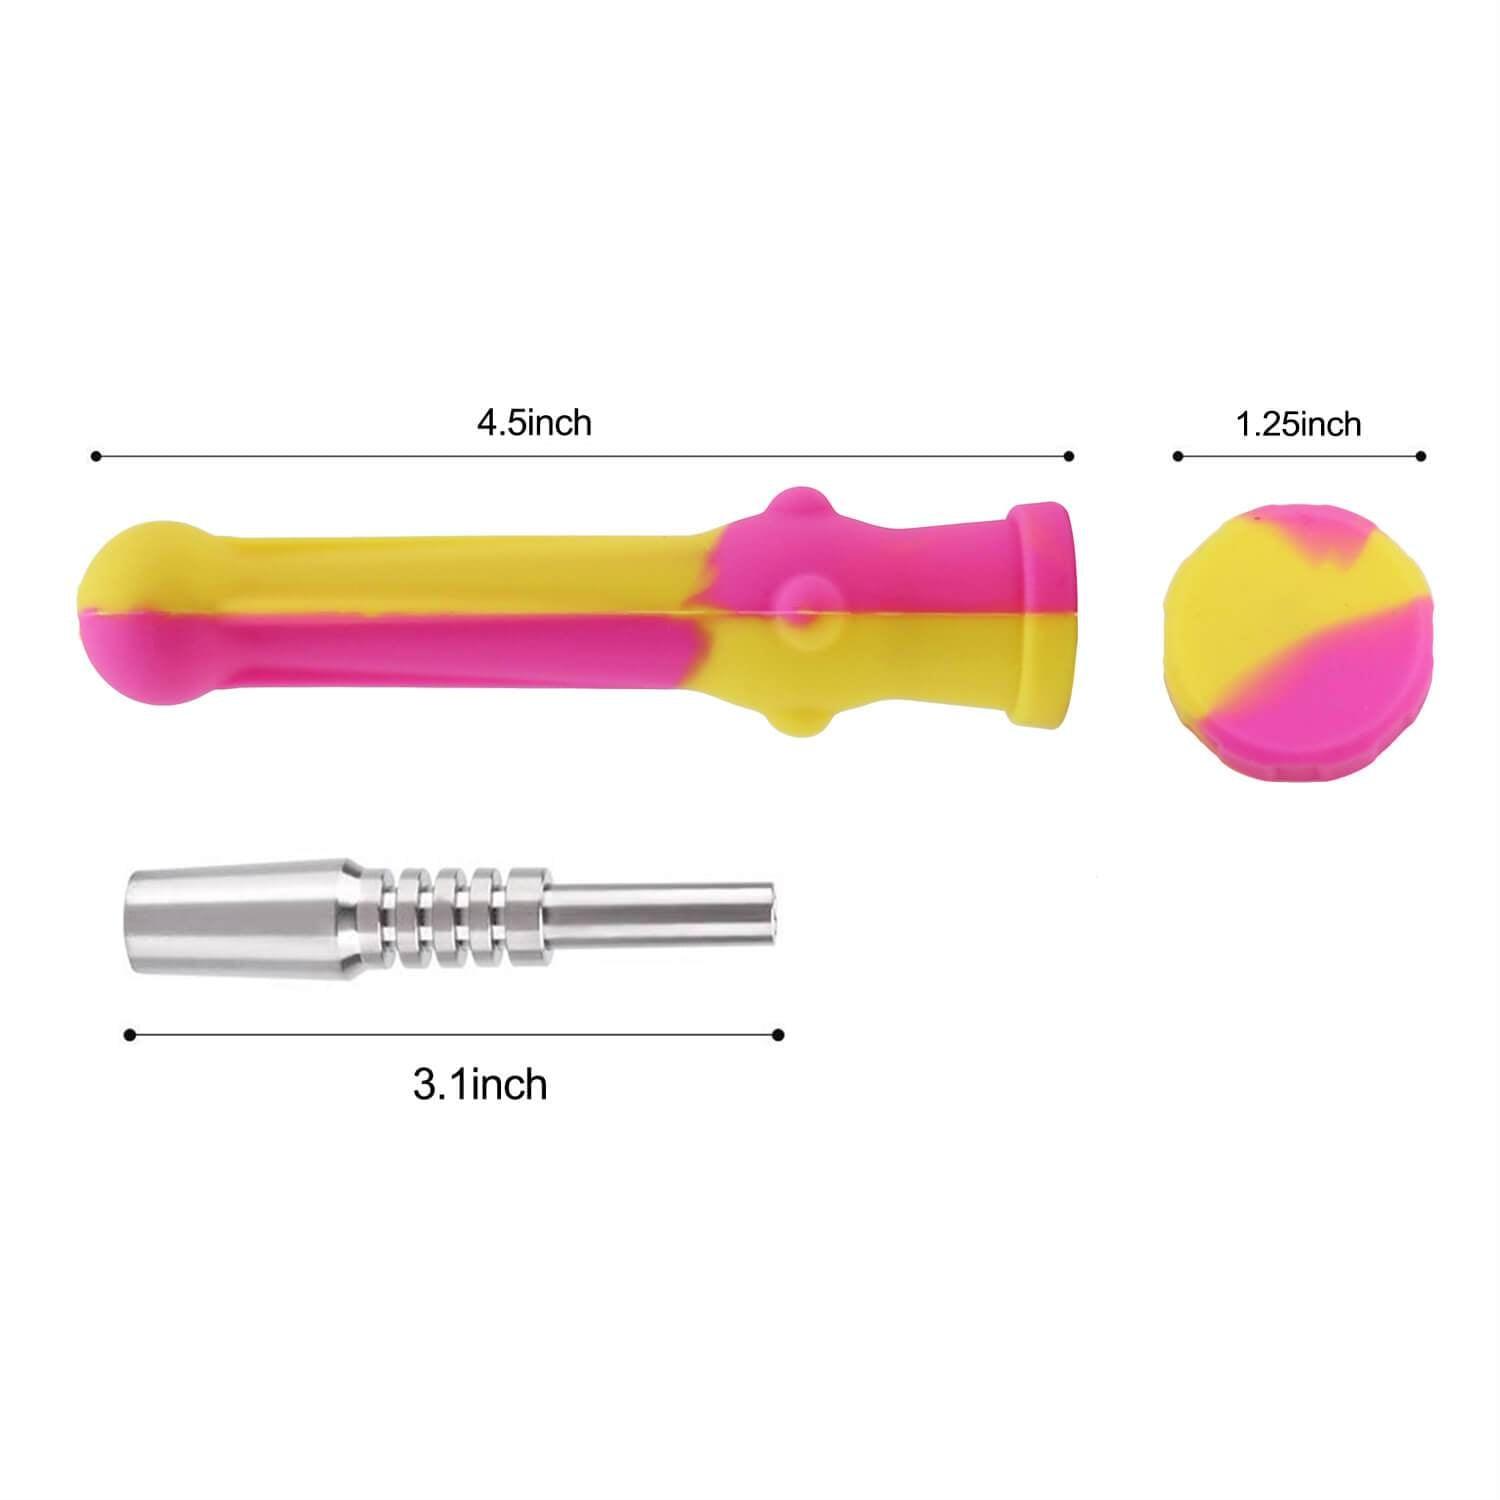 Silicone Nectar Collector For Wax - PILOT DIARY